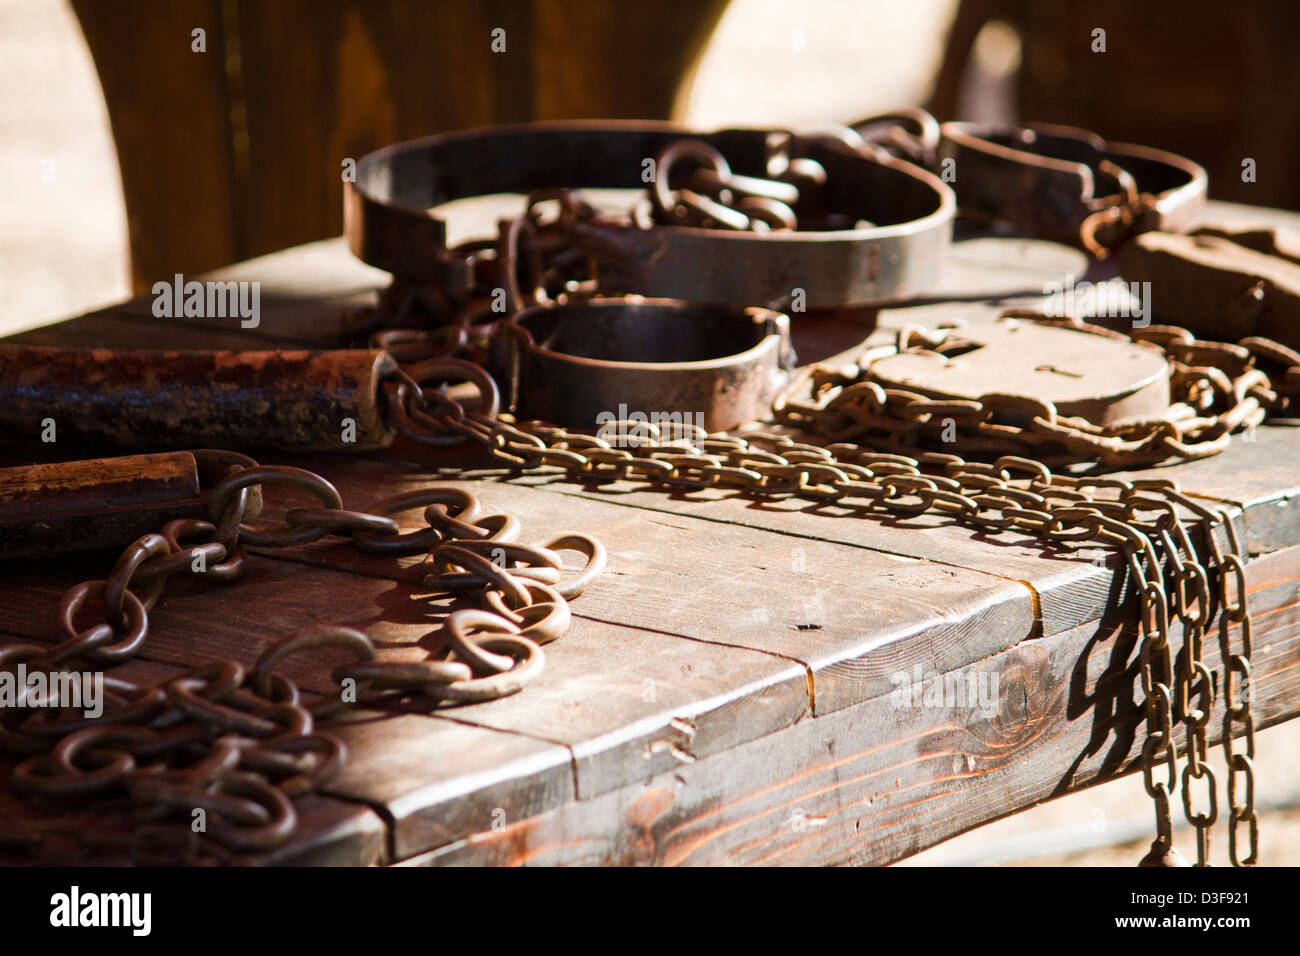 Close view detail of a table filled with torture instruments. Stock Photo